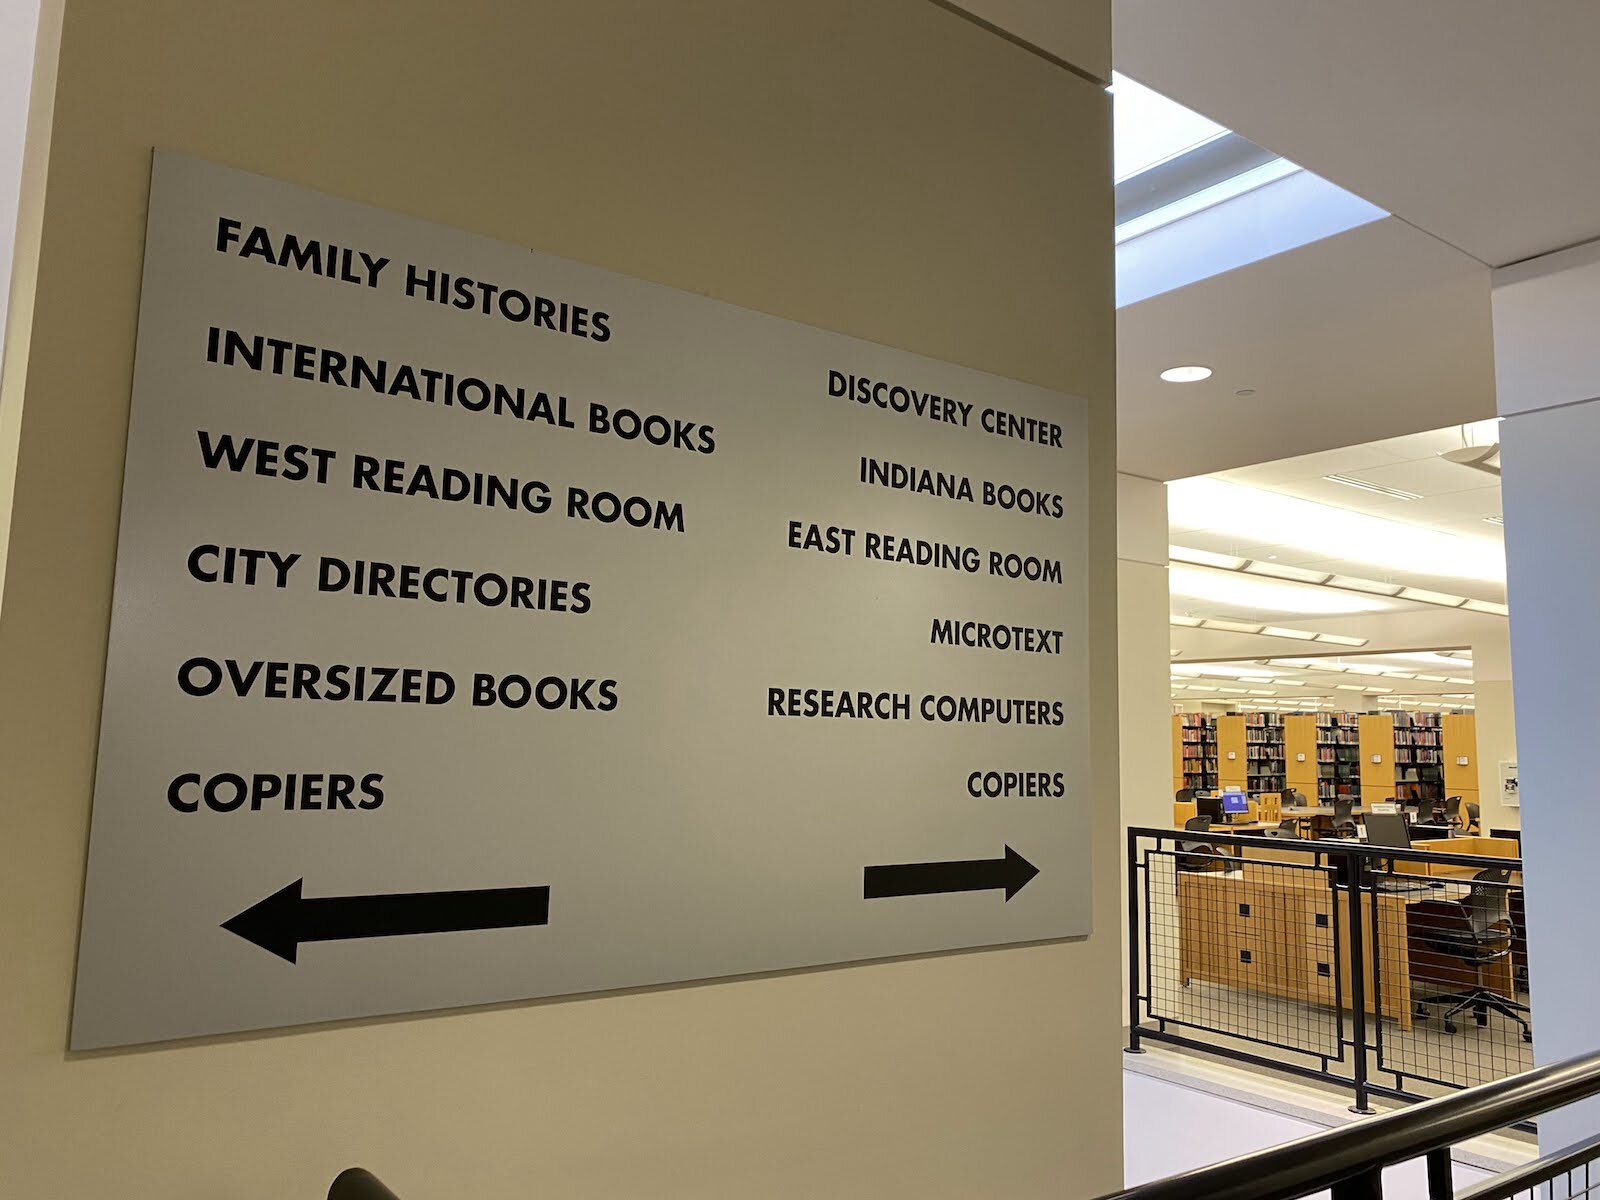 Anyone can conduct family research at the Allen County Public Library's Genealogy Center.